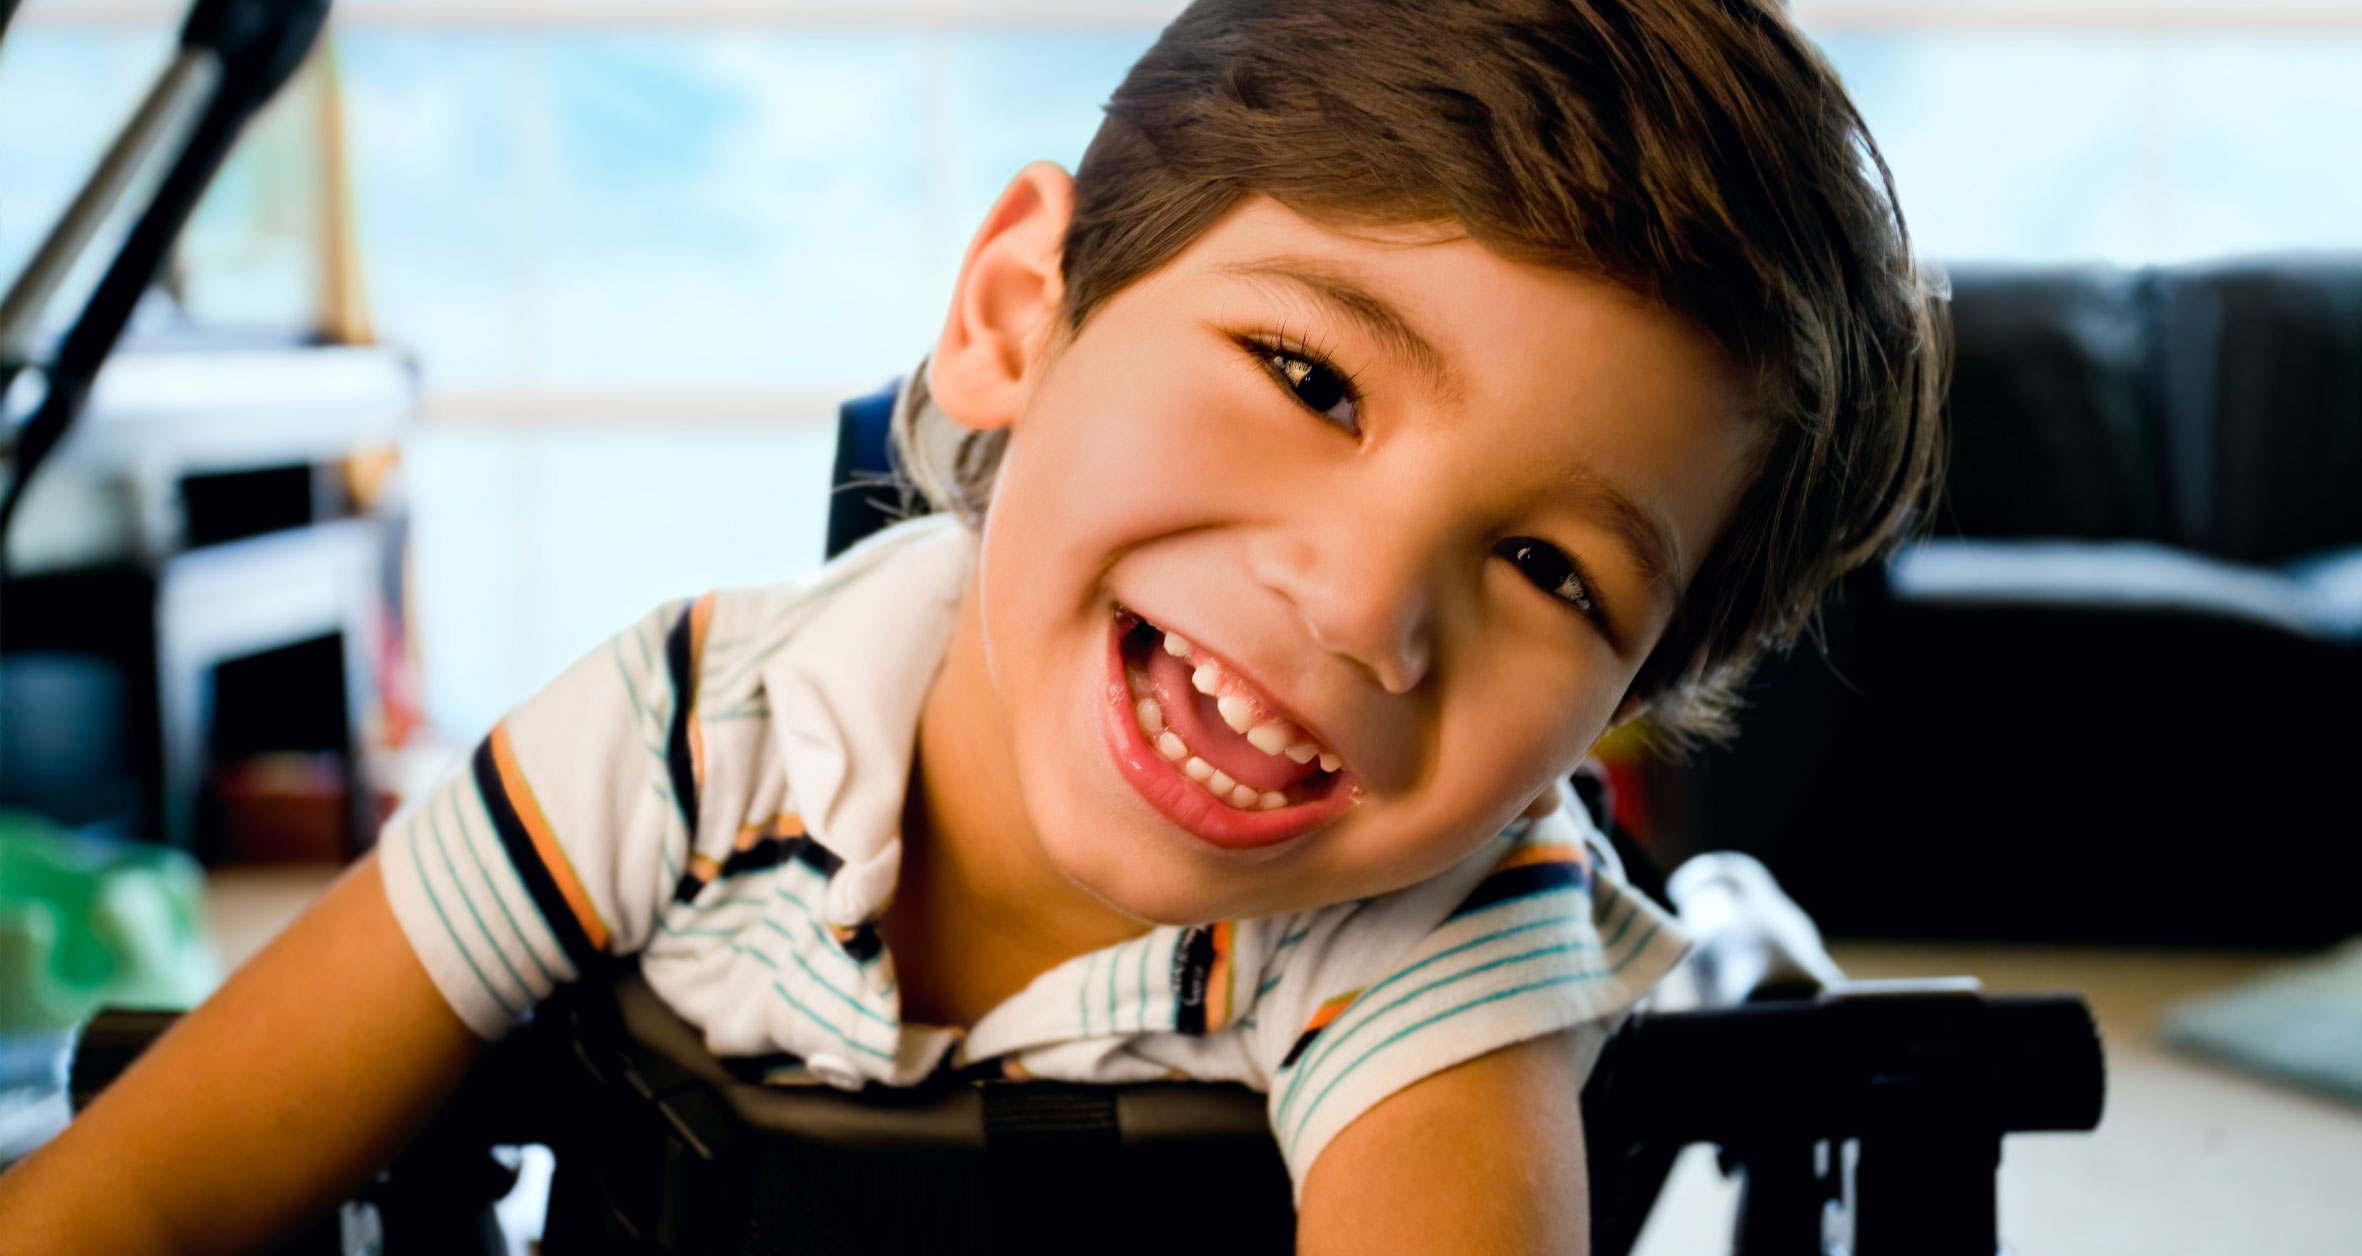 Article - Oct 2022 Cerebral Palsy in Children